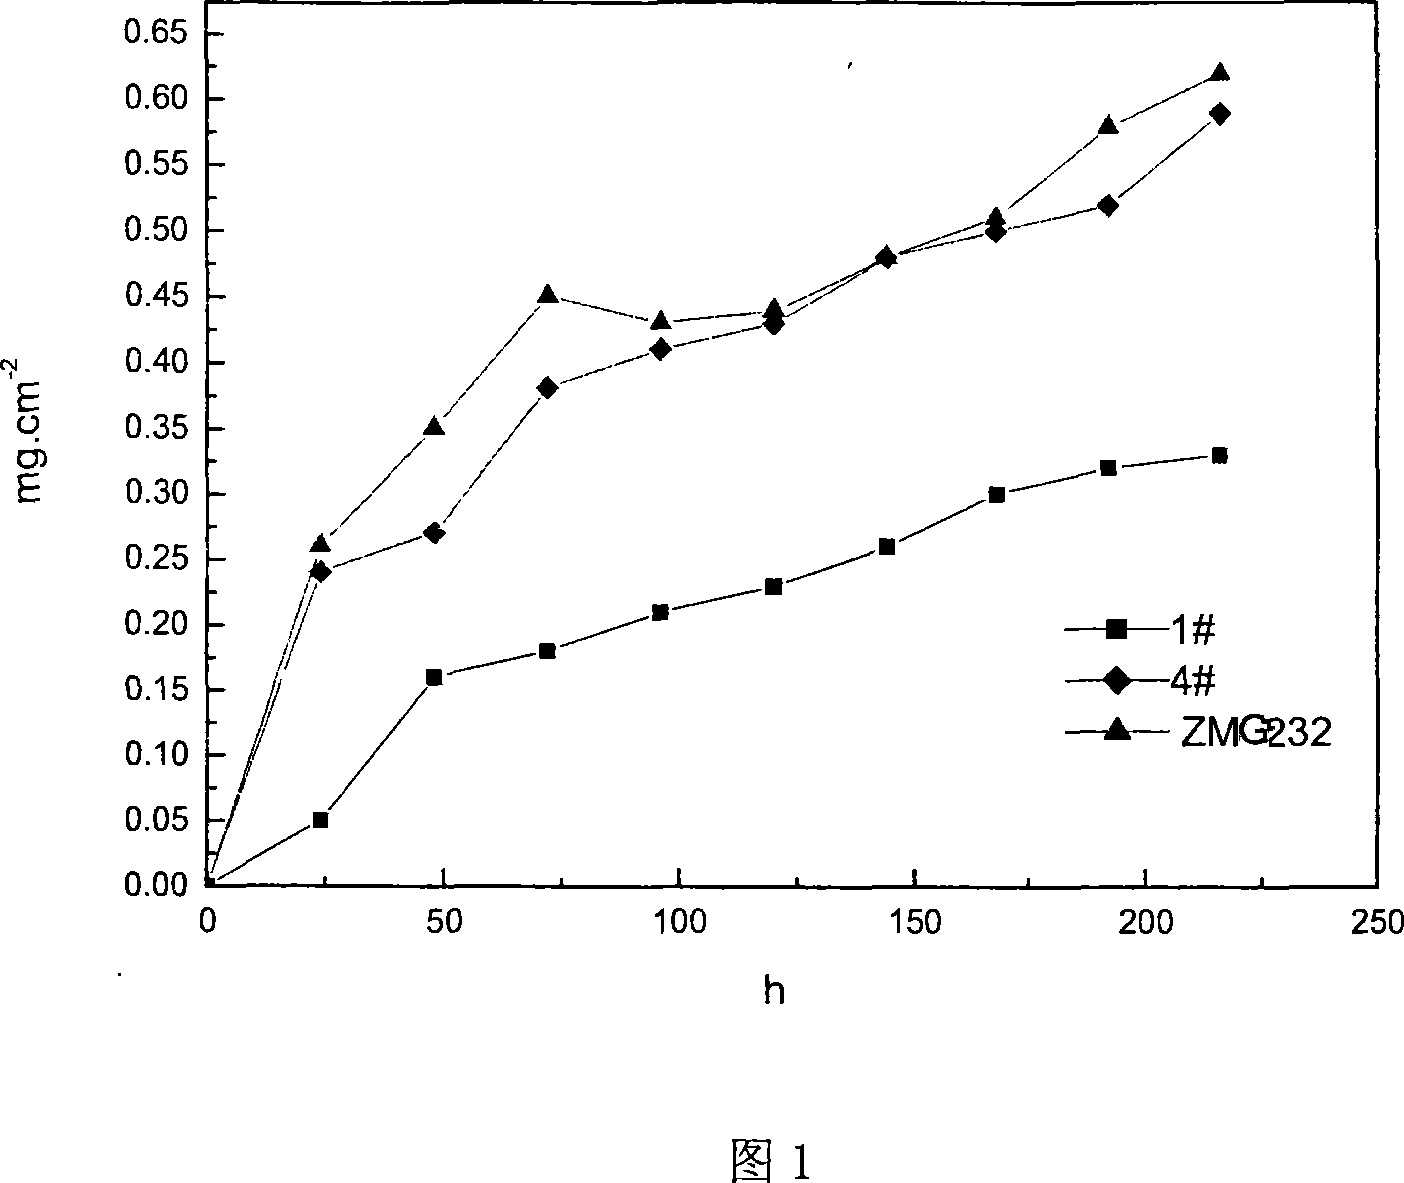 Ferritic stainless steel containing rare earth element yttrium for solid-oxide fuel battery